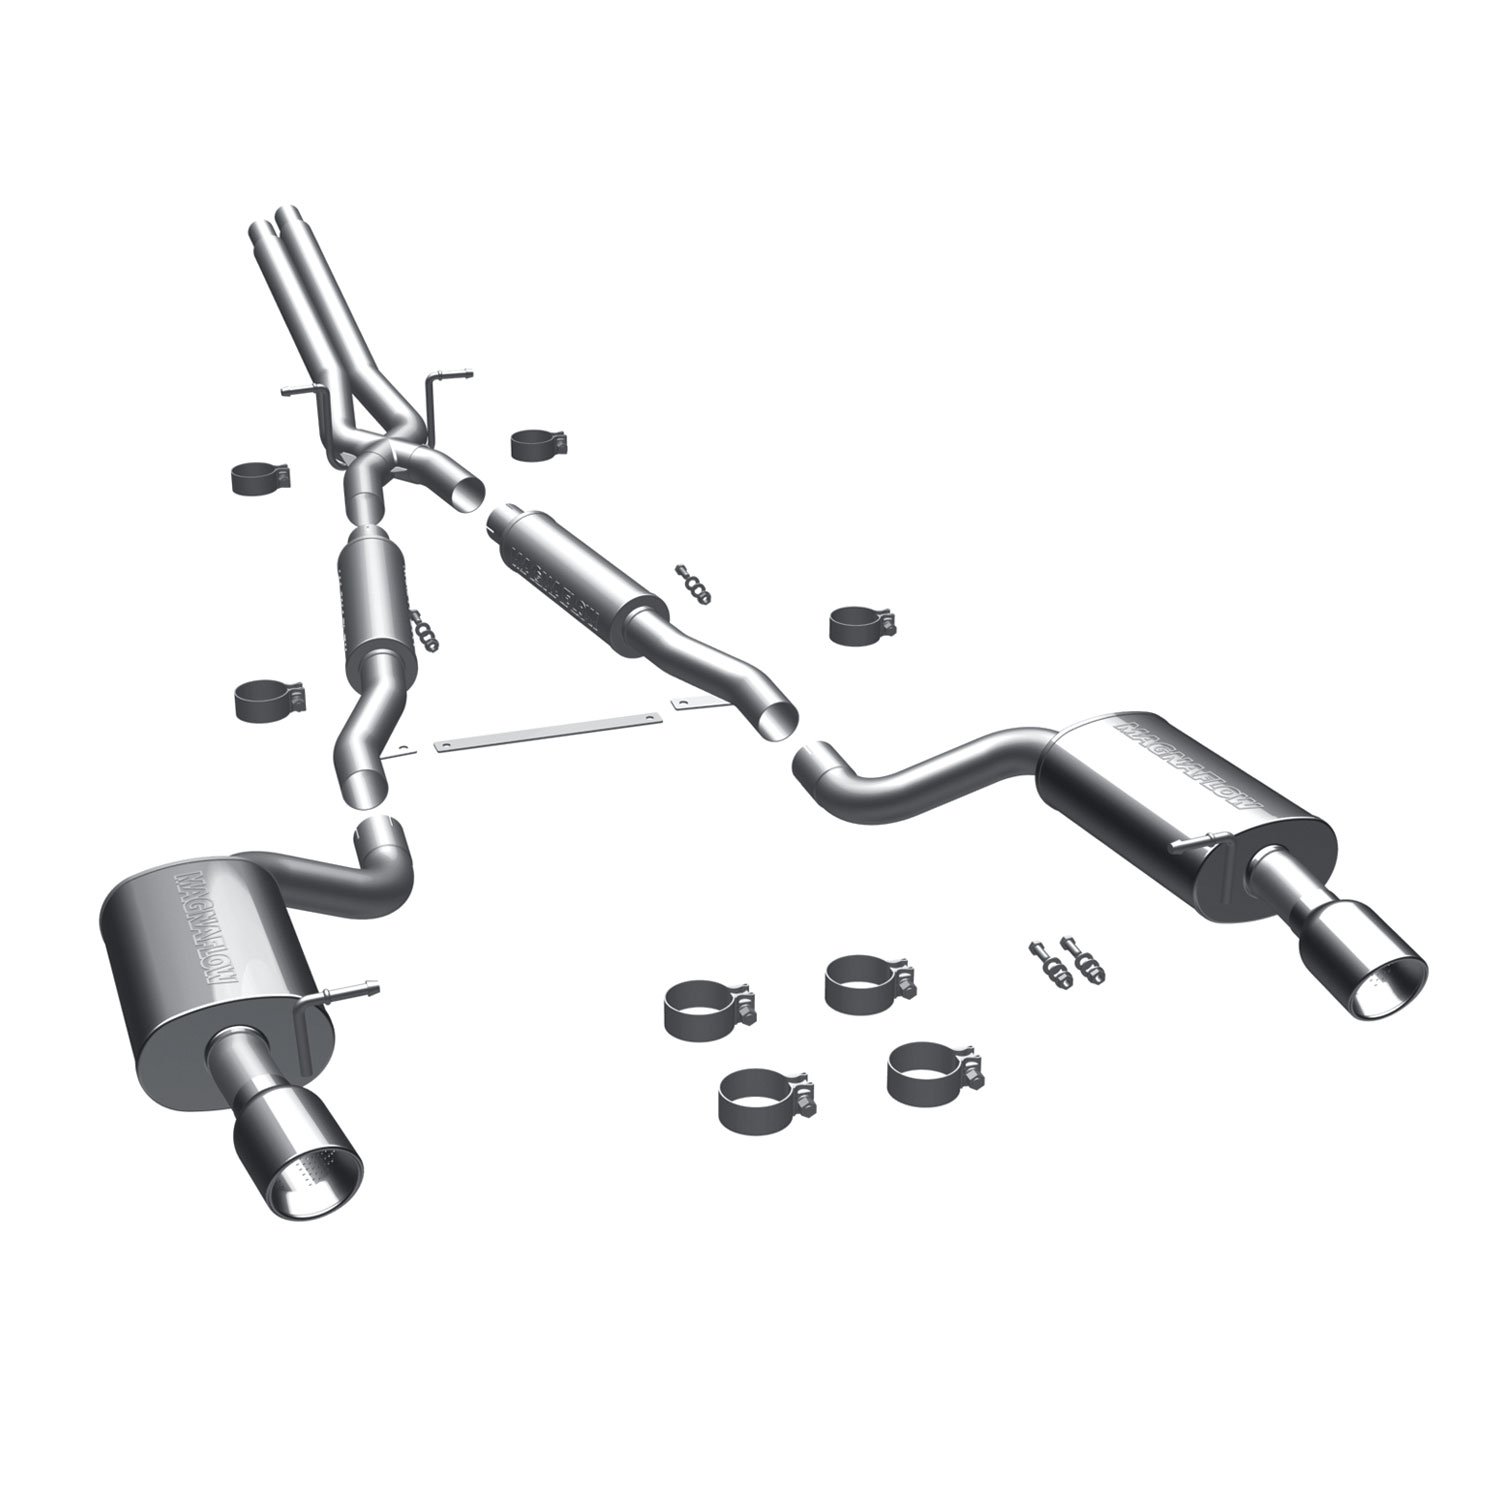 MagnaFlow Touring Exhaust System